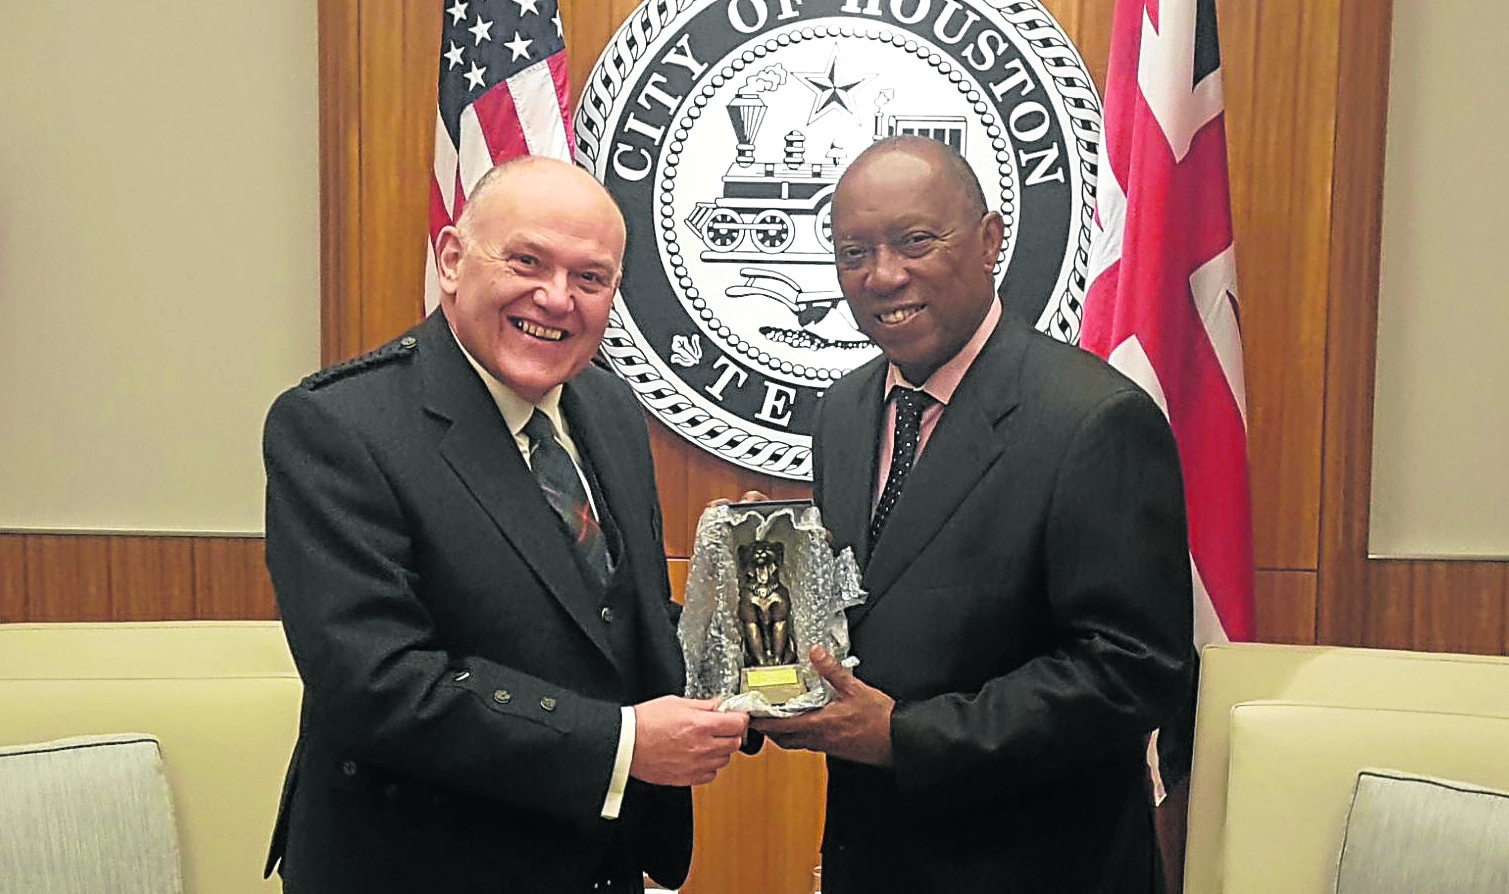 Barney Crocket with Mayor Sylvester Turner, Mayor of Houston on a visit to City Hall yesterday.  
handout pic from Aberdeen City Council